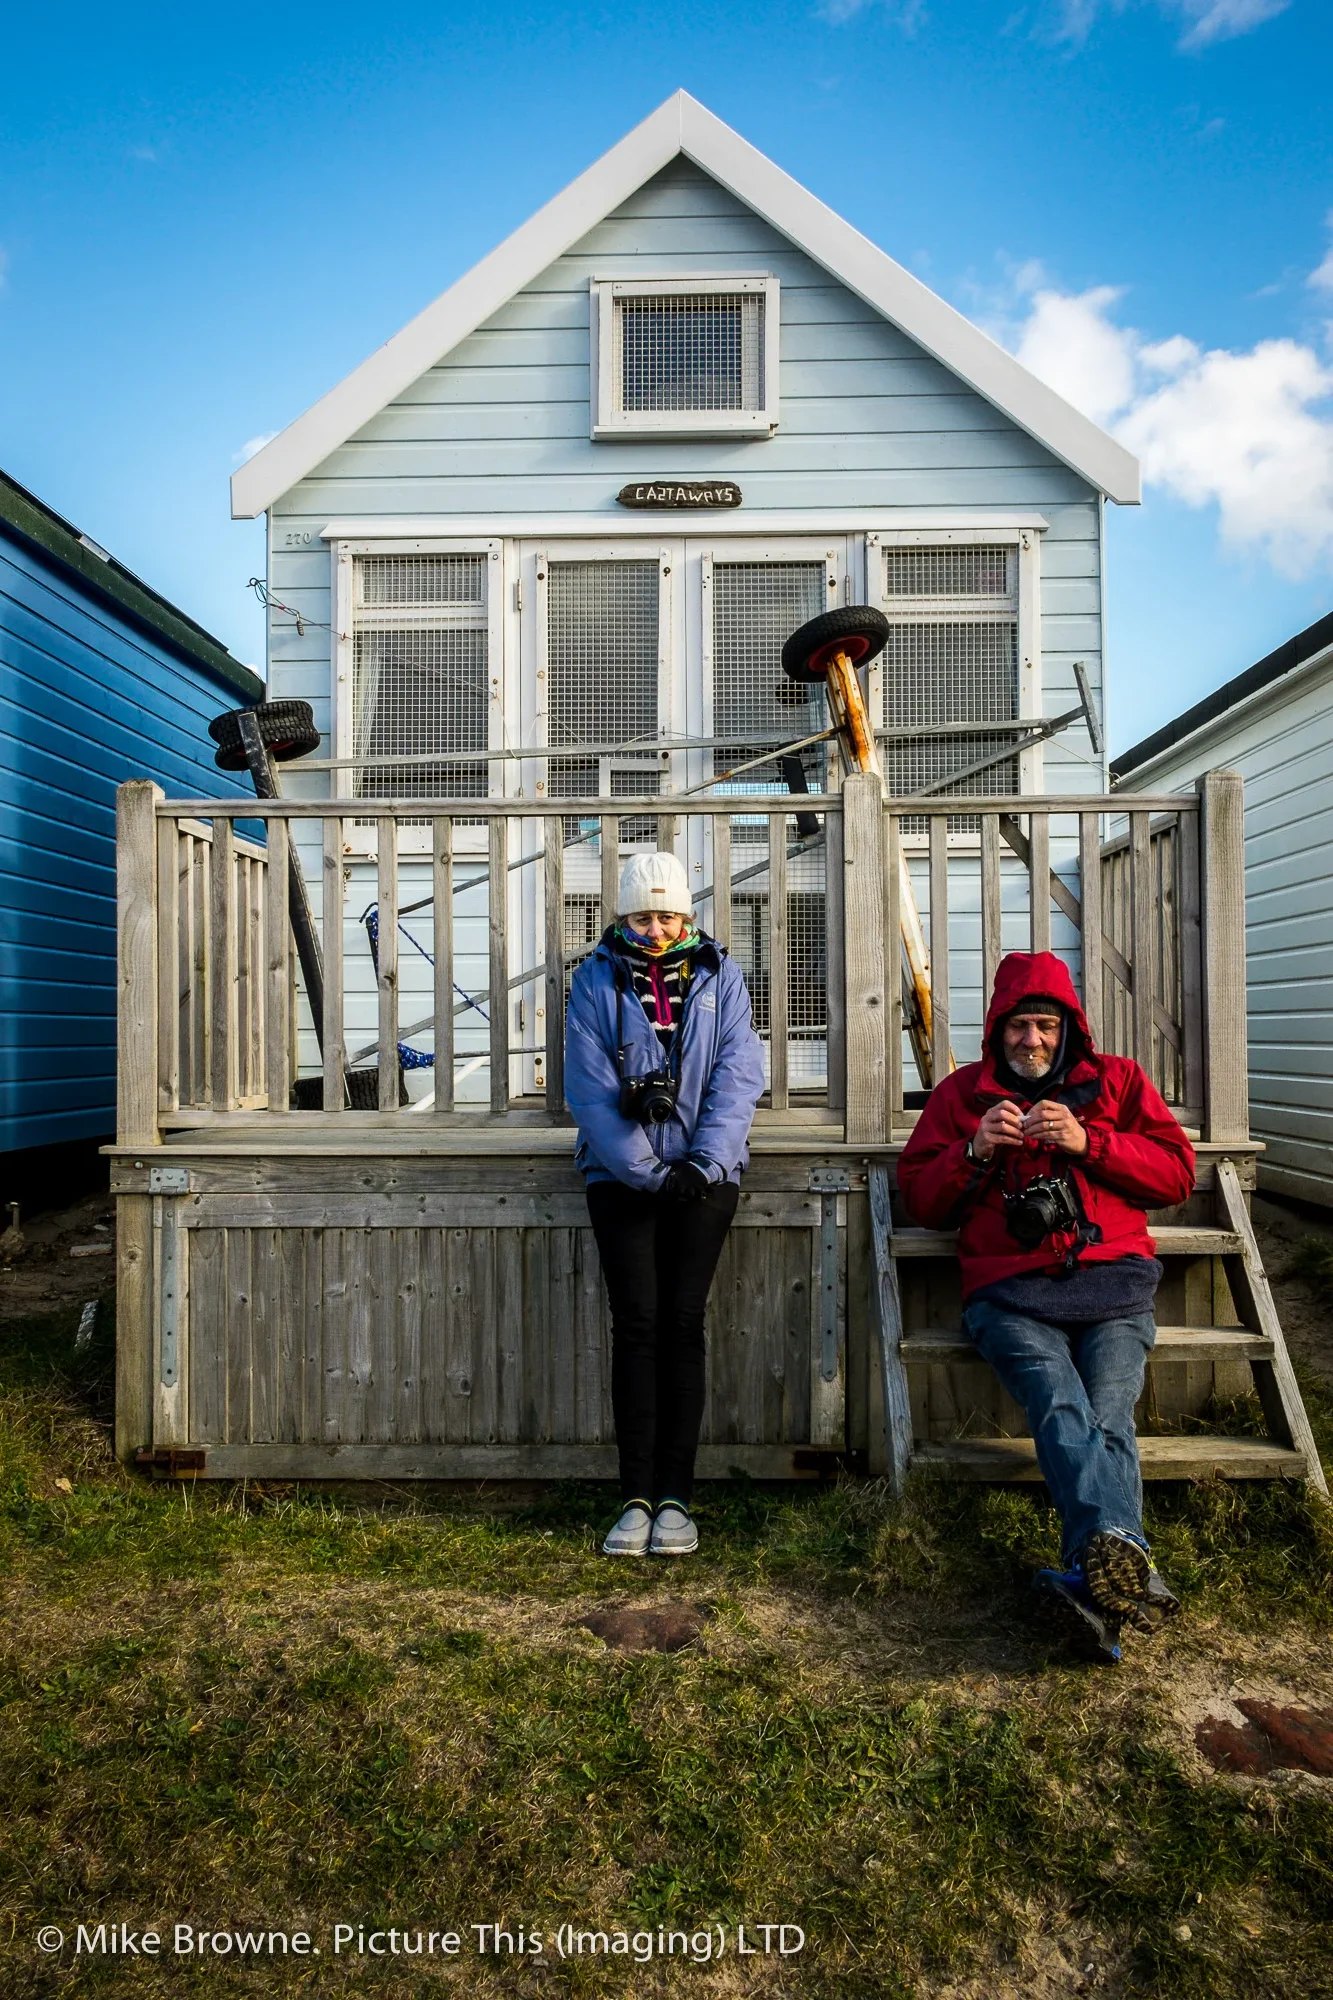 Man and woman dressed in winter clothing looking at cameras and resting against a blue British beach hut